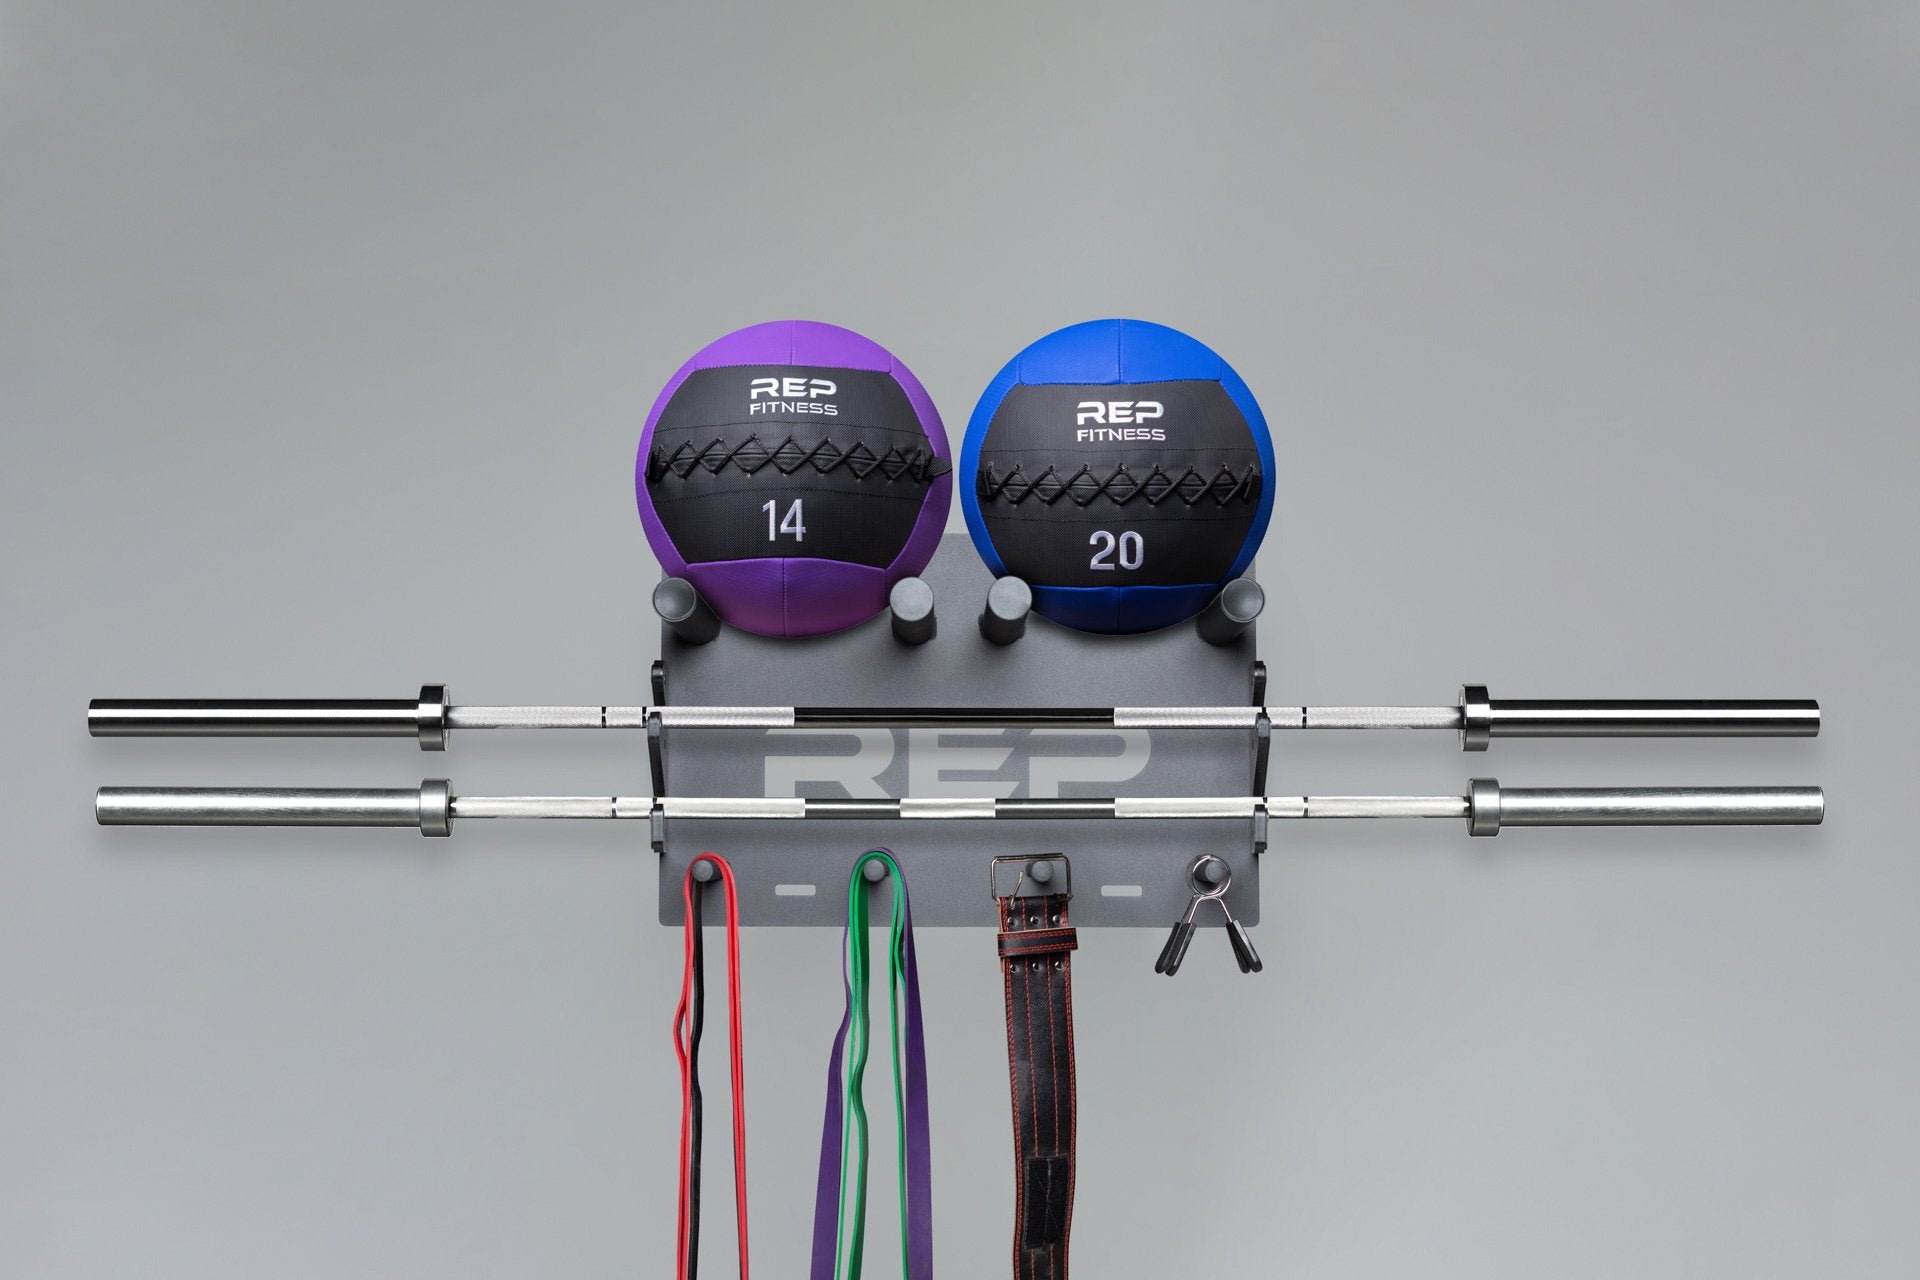 REP Wall Mounted Gym Storage Rack loaded with two REP medicine balls on top, two barbells in the middle, and exercise bands, a lifting belt, and spring clips on the bottom.